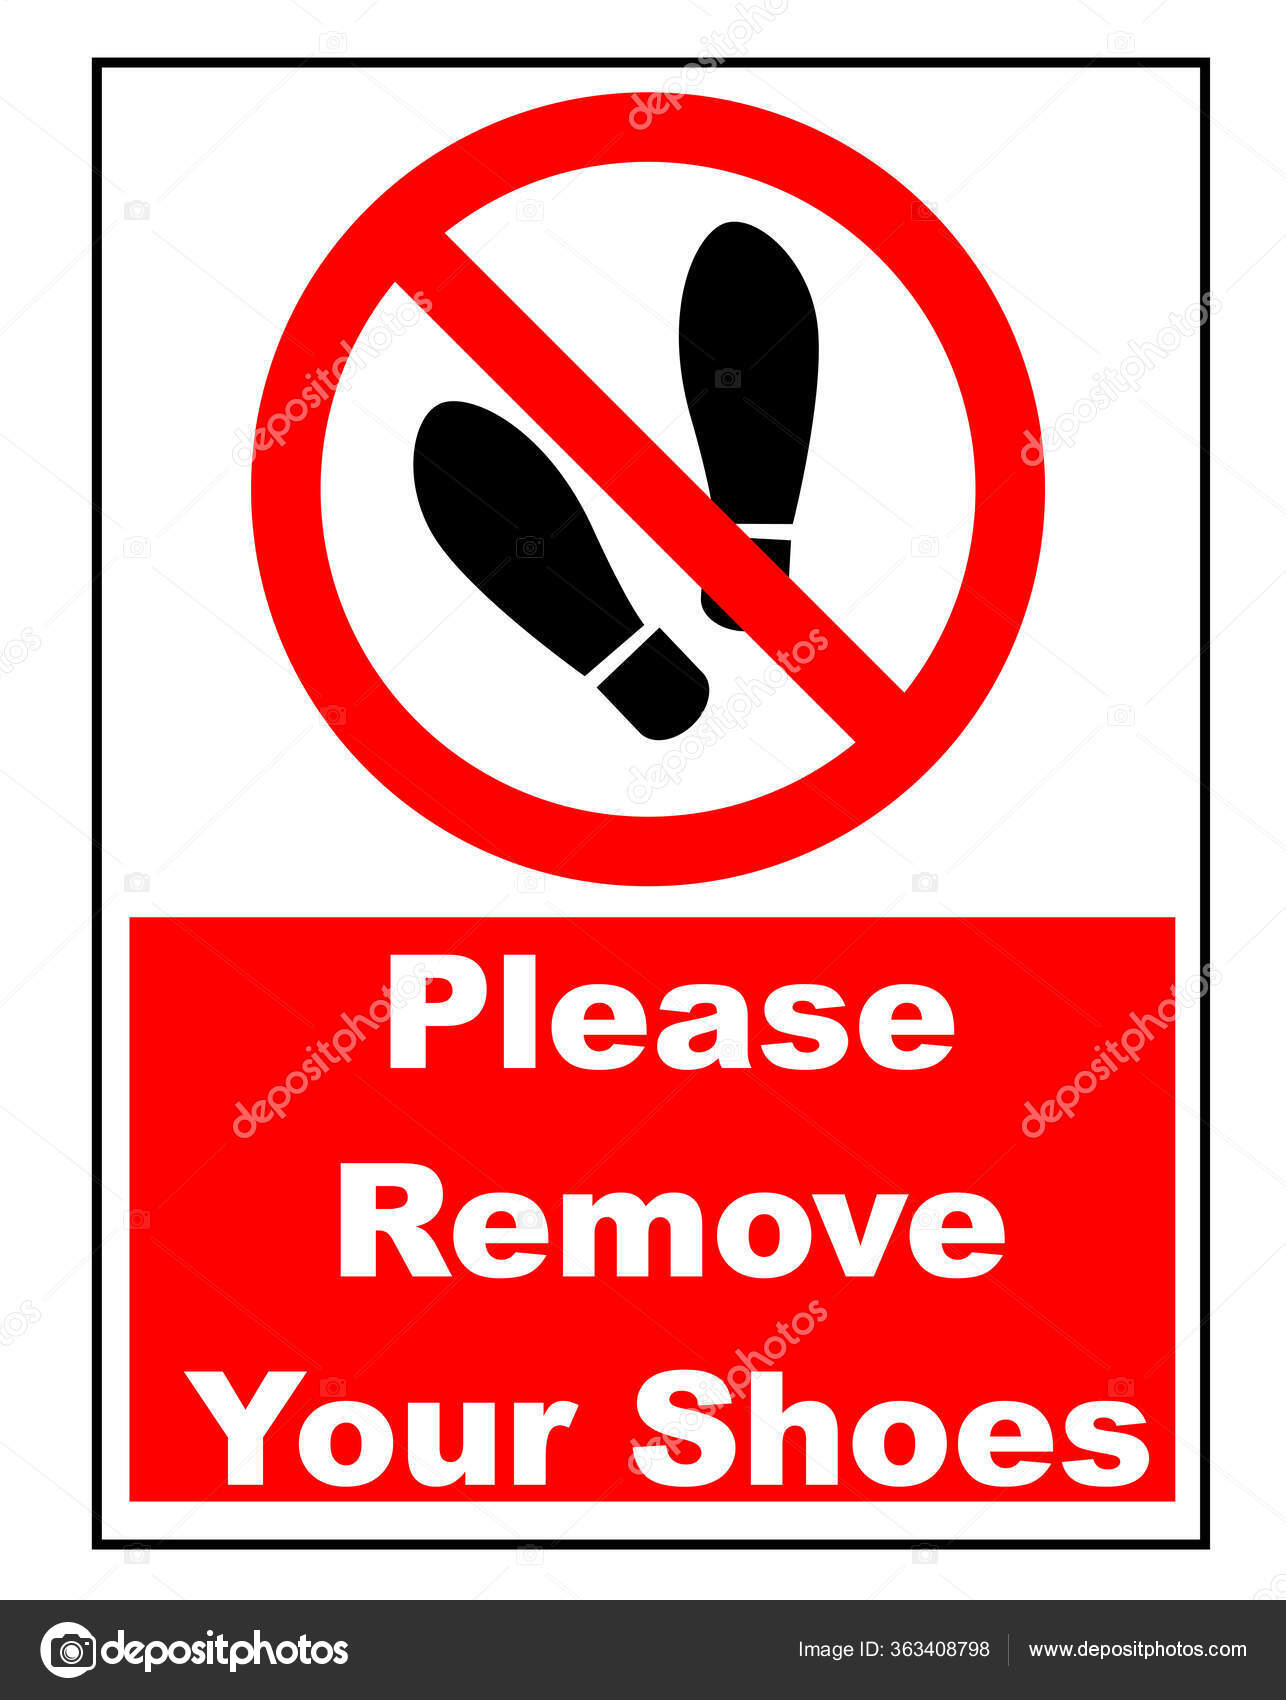 Remove Your Shoes Red Sign ⬇ Vector Image by © mnaleen.gmail.com ...